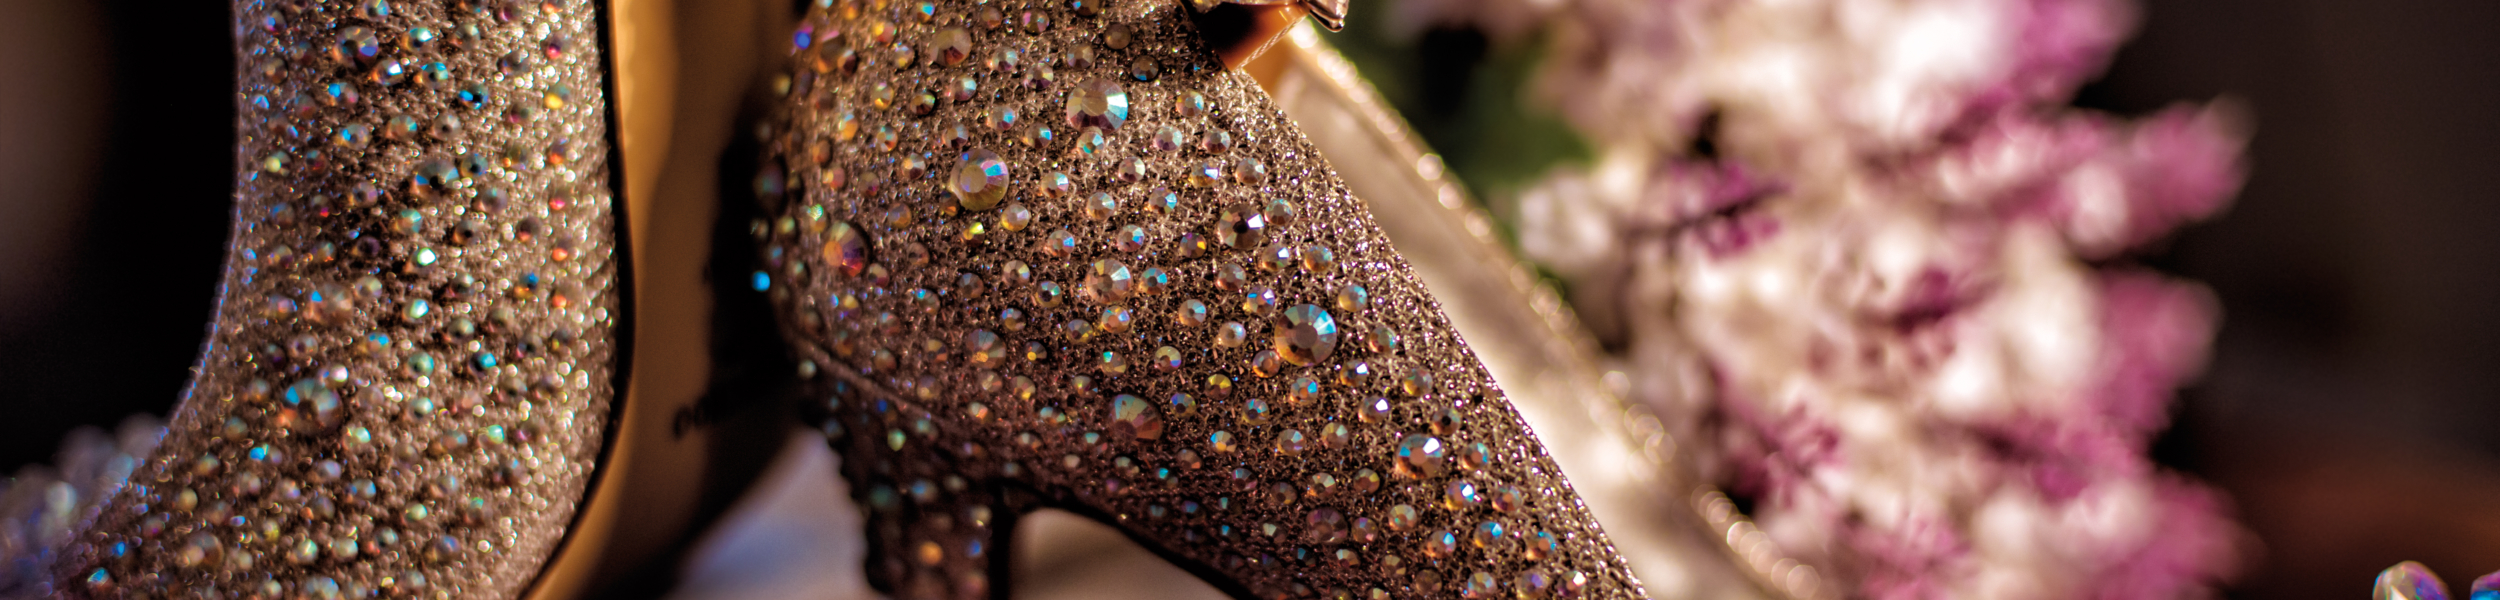 Wedding shoes with crystals wedding ring and bouquet